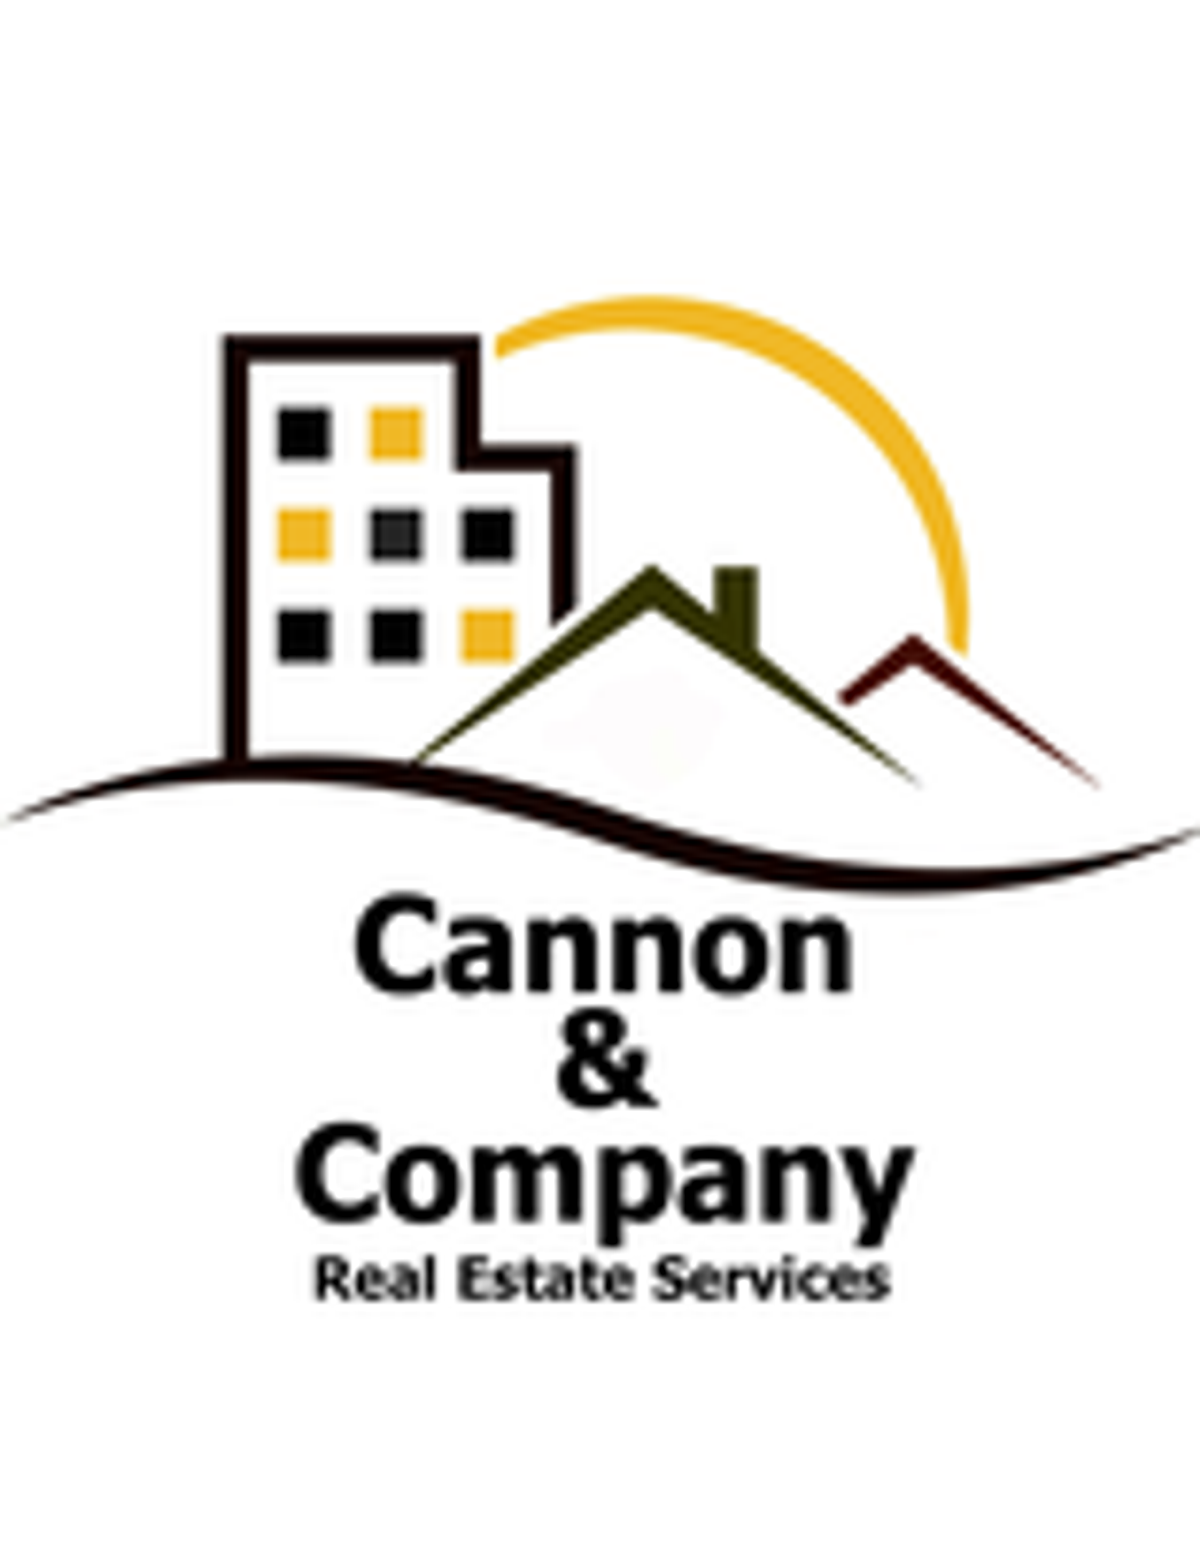 Photo for Connor Mecham, Listing Agent at Cannon & Company